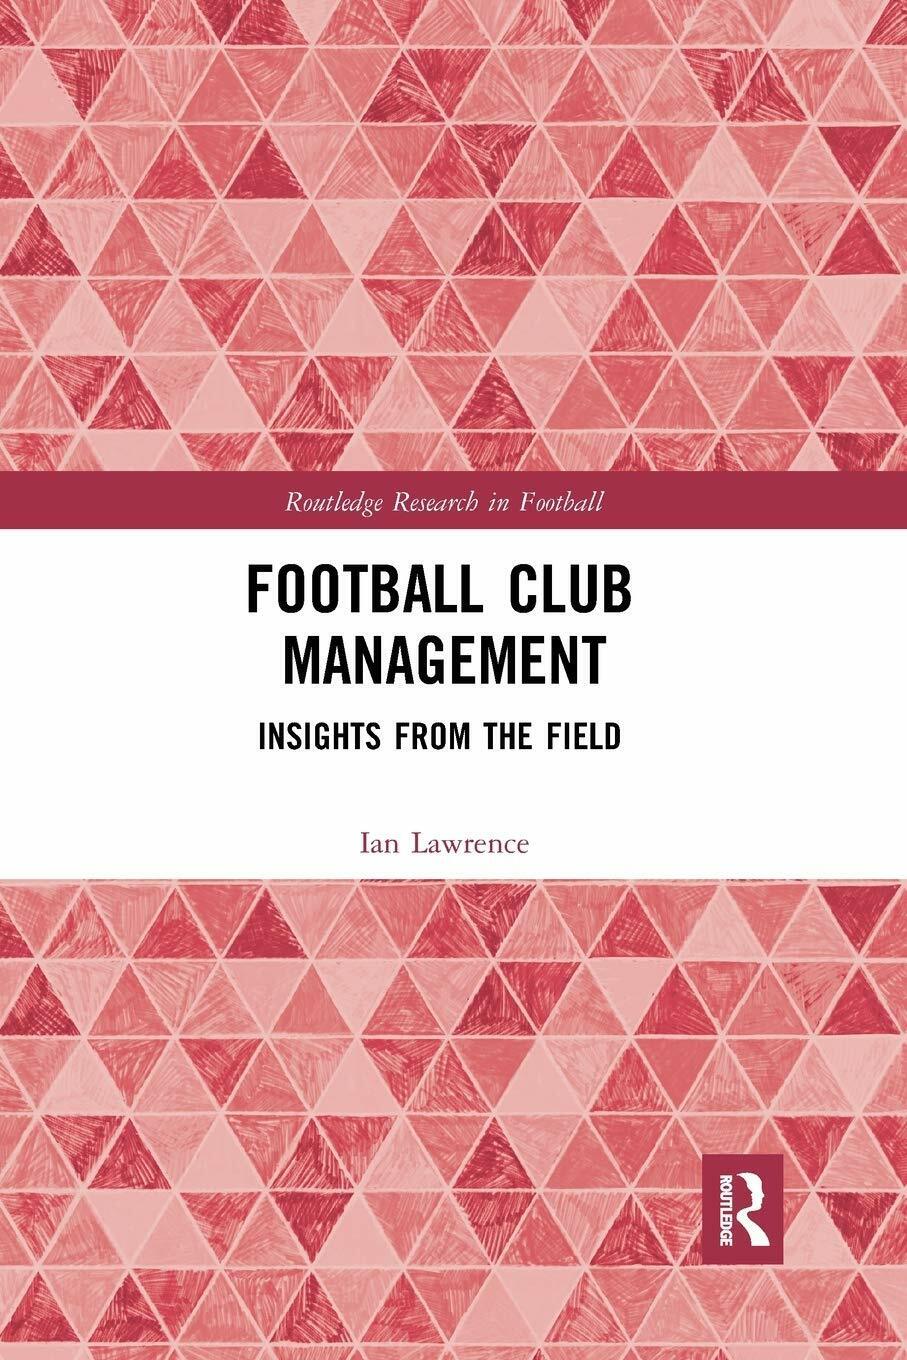 Football Club Management - Ian Lawrence - Routledge